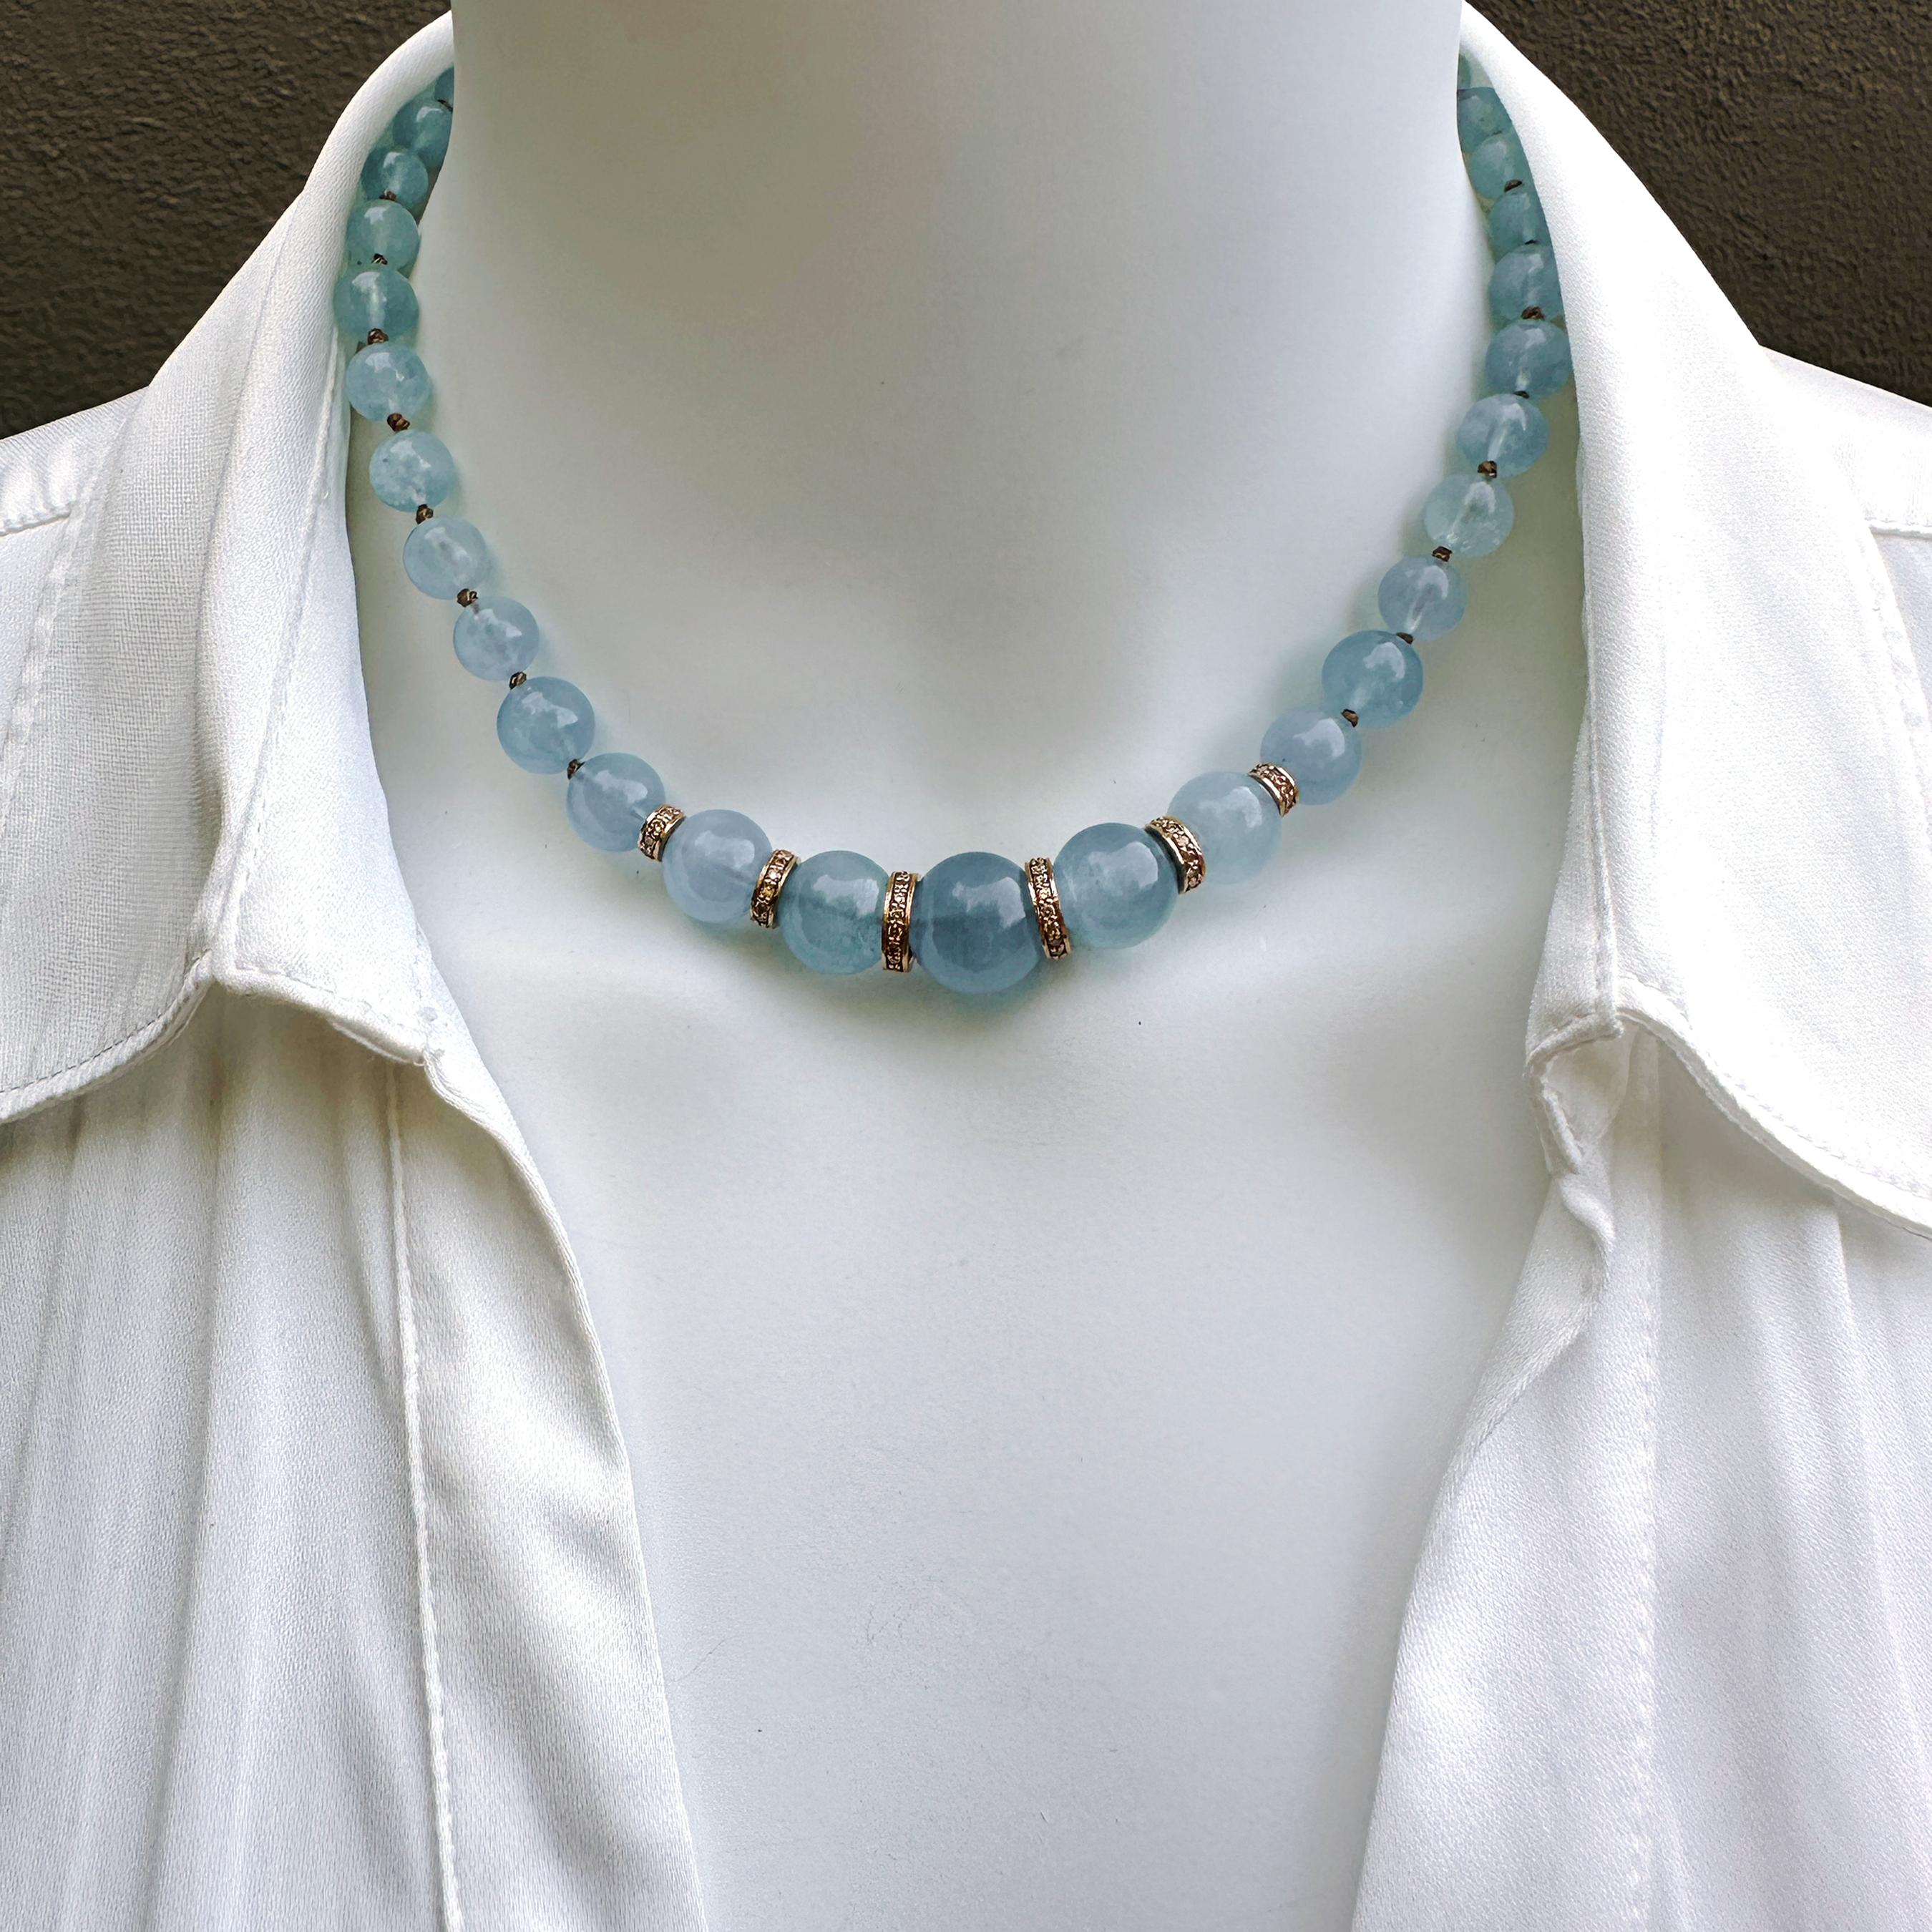 Strung on copper-colored silk and knotted like a string of pearls, these graduated round milky-soft aquamarine beads would  be beautiful enough on their own, but we've given them an extra dose of glam by adding six diamond rondelle beads.  

The